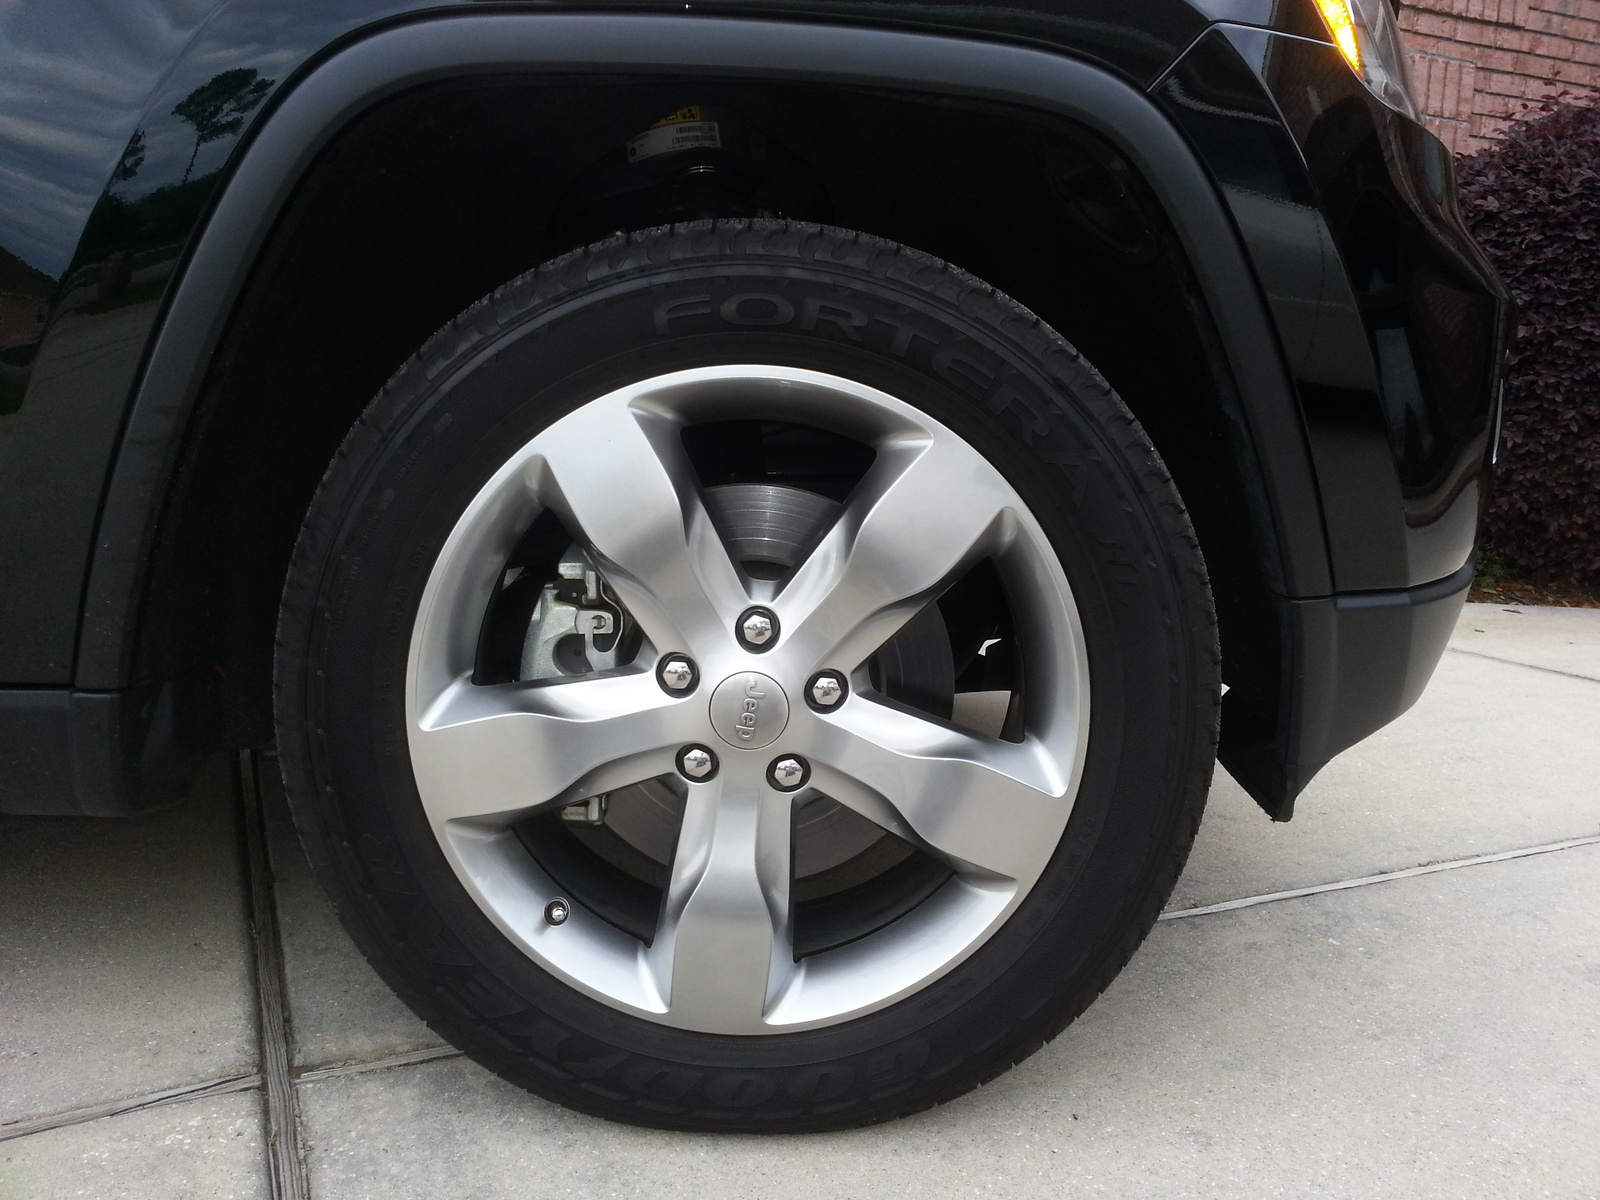 04 Jeep grand cherokee overland tire size #3